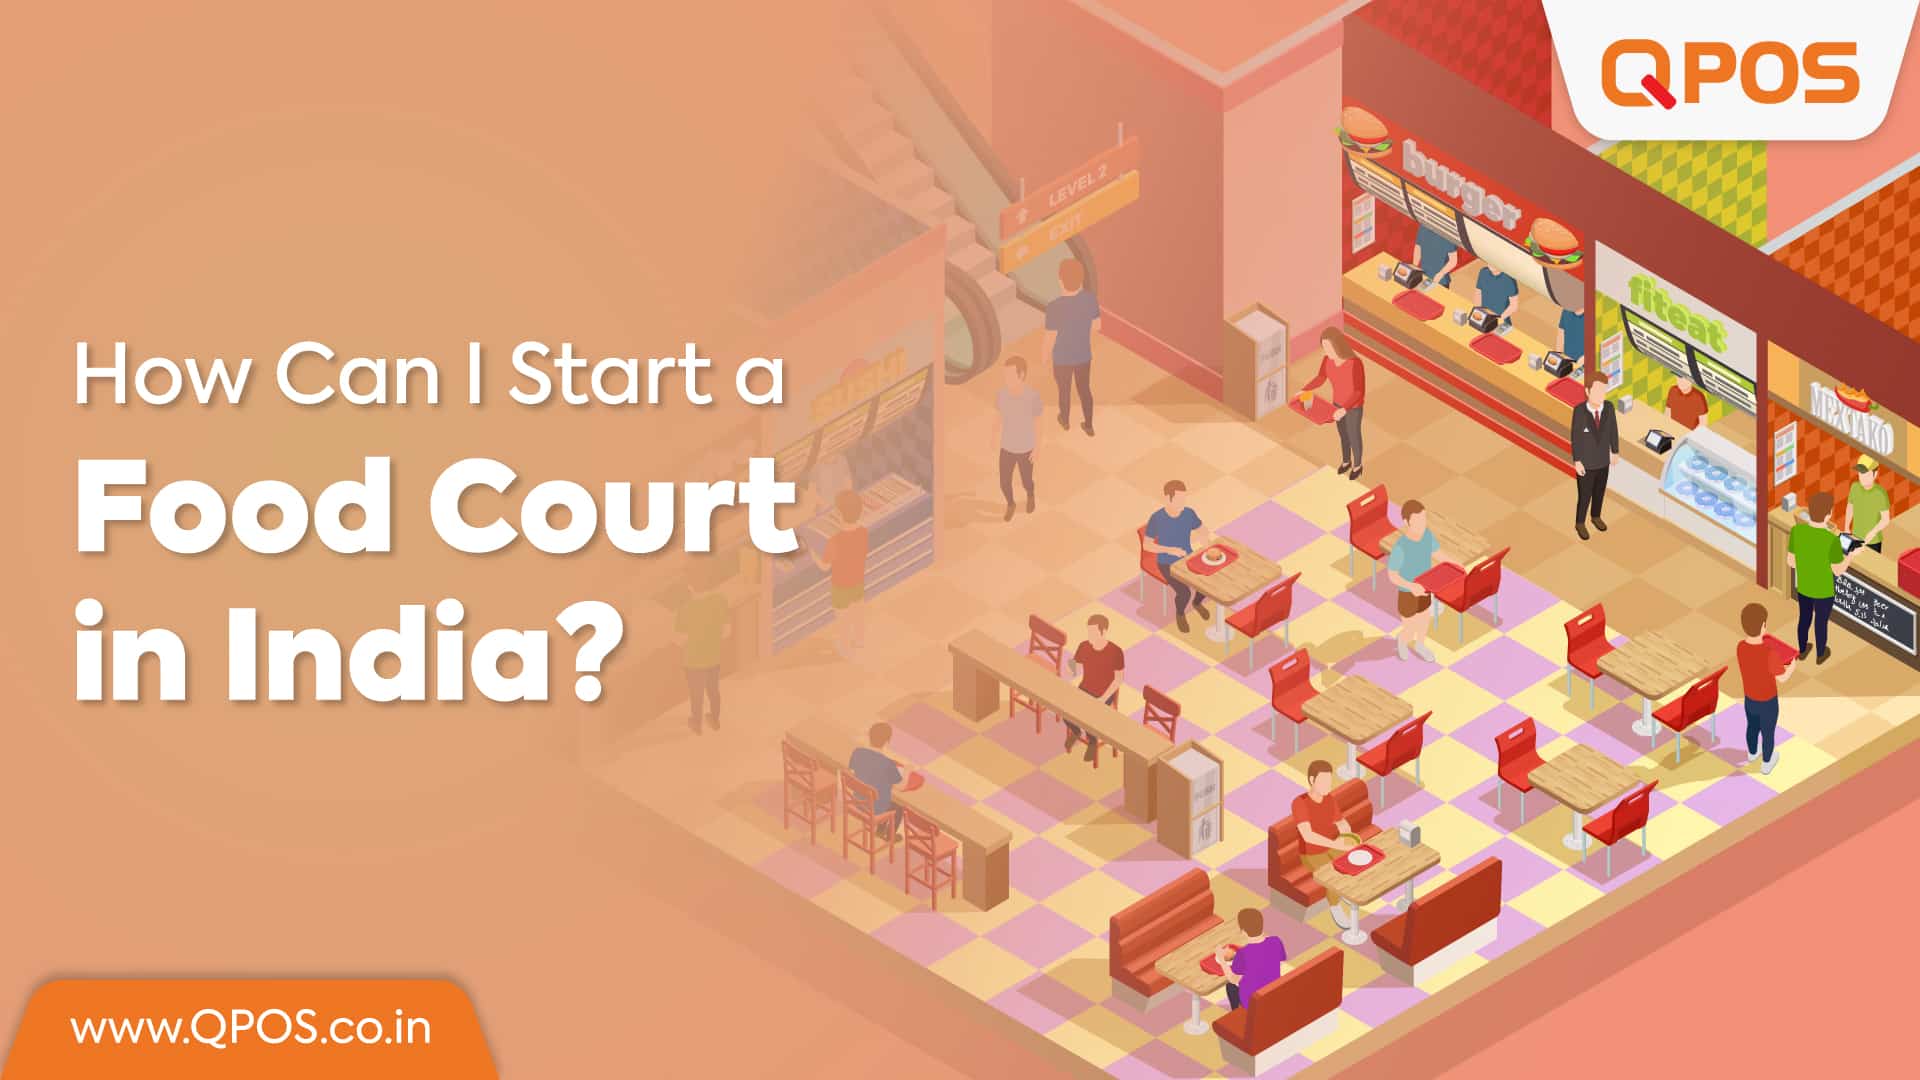 How Can I Start a Food Court in India?